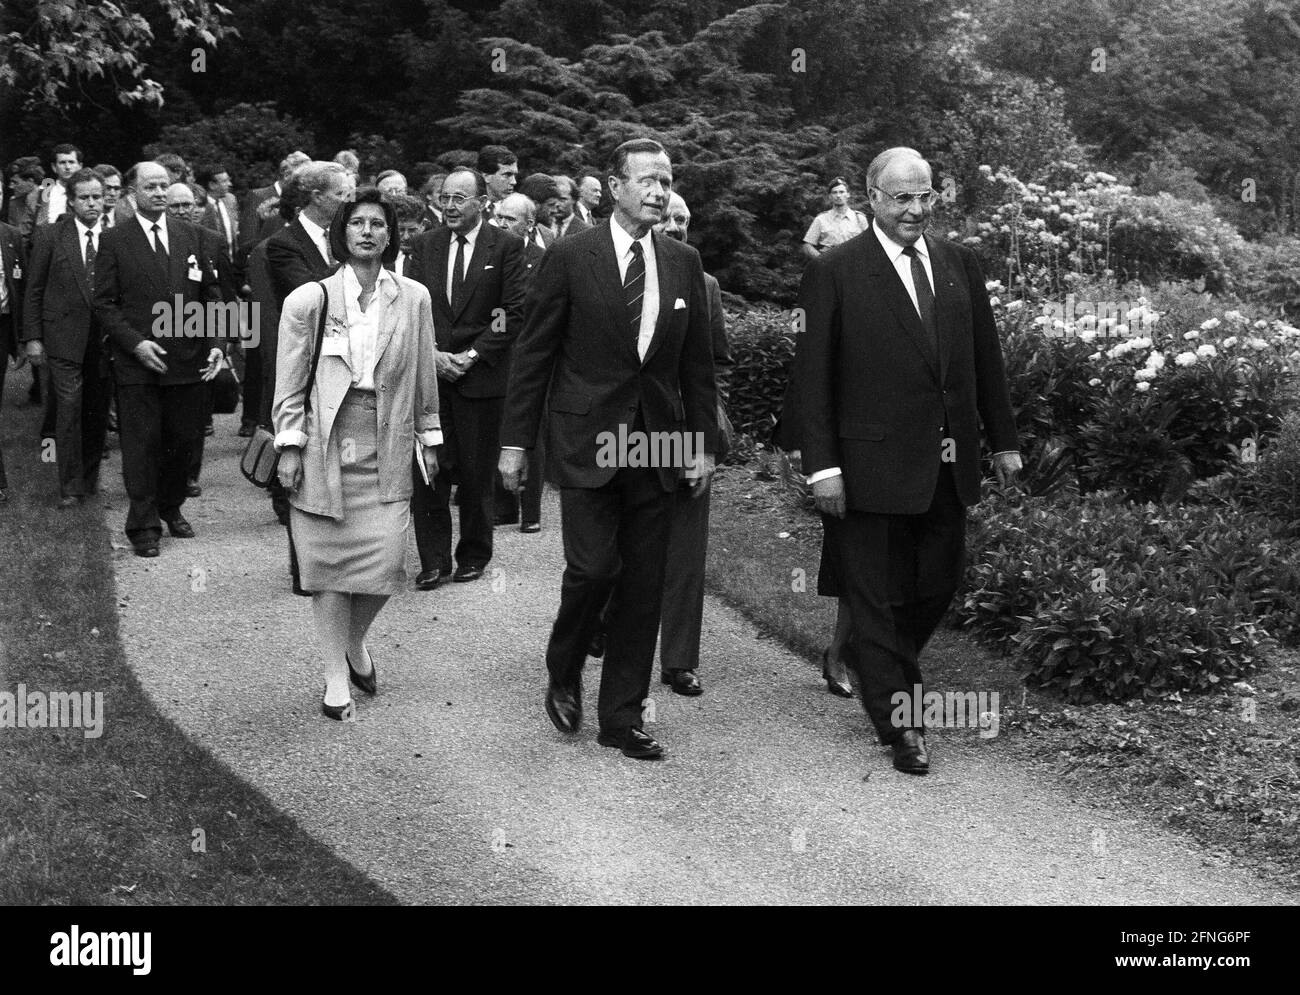 Germany, Bonn, 30.05.1989 Archive No.: 06-61-11 Visit of the American President Photo: Federal Chancellor Helmut Kohl and George H. W. Bush [automated translation] Stock Photo